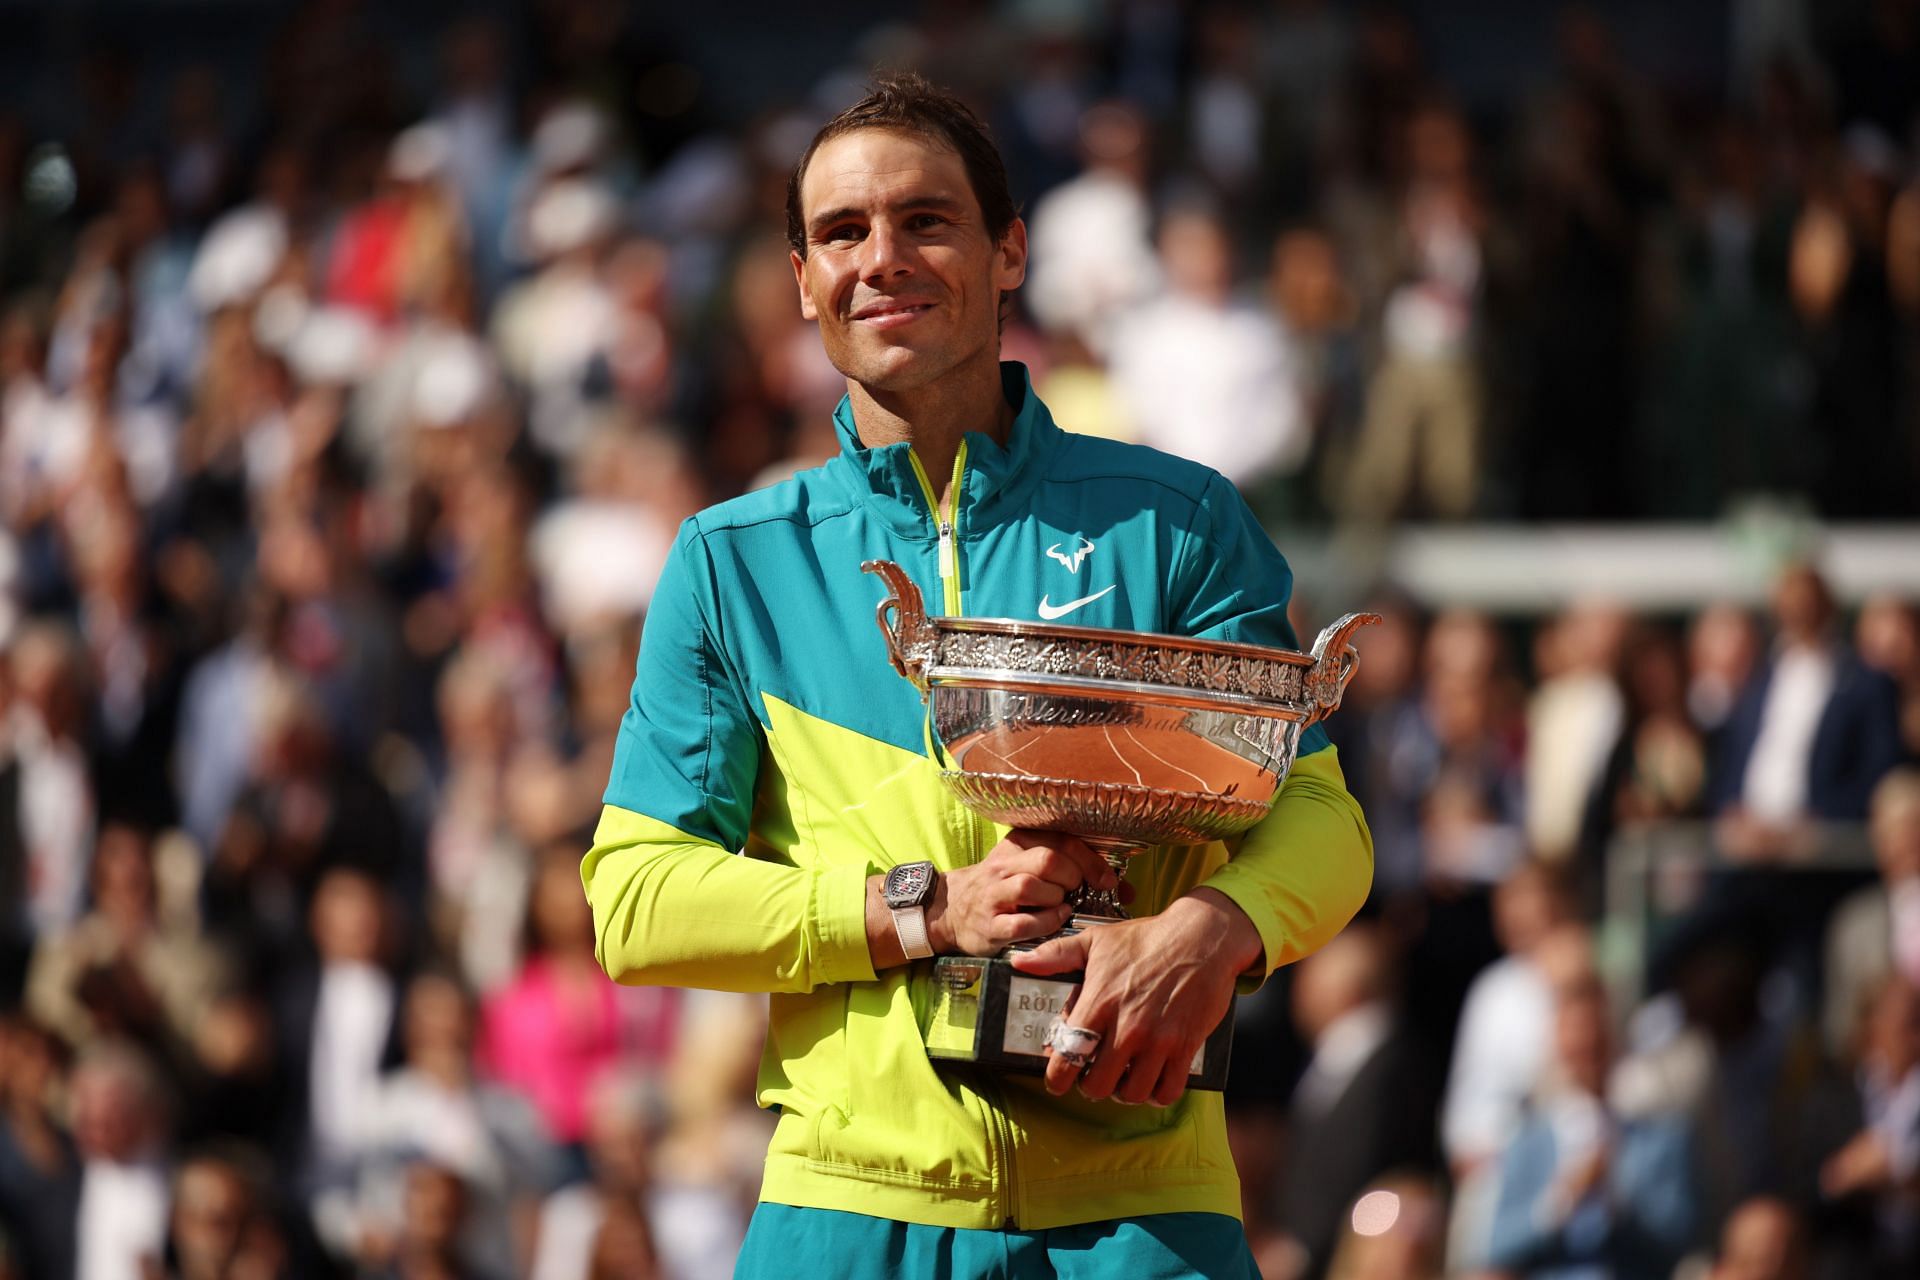 Rafael Nadal poses with the trophy after winning the French Open 2022